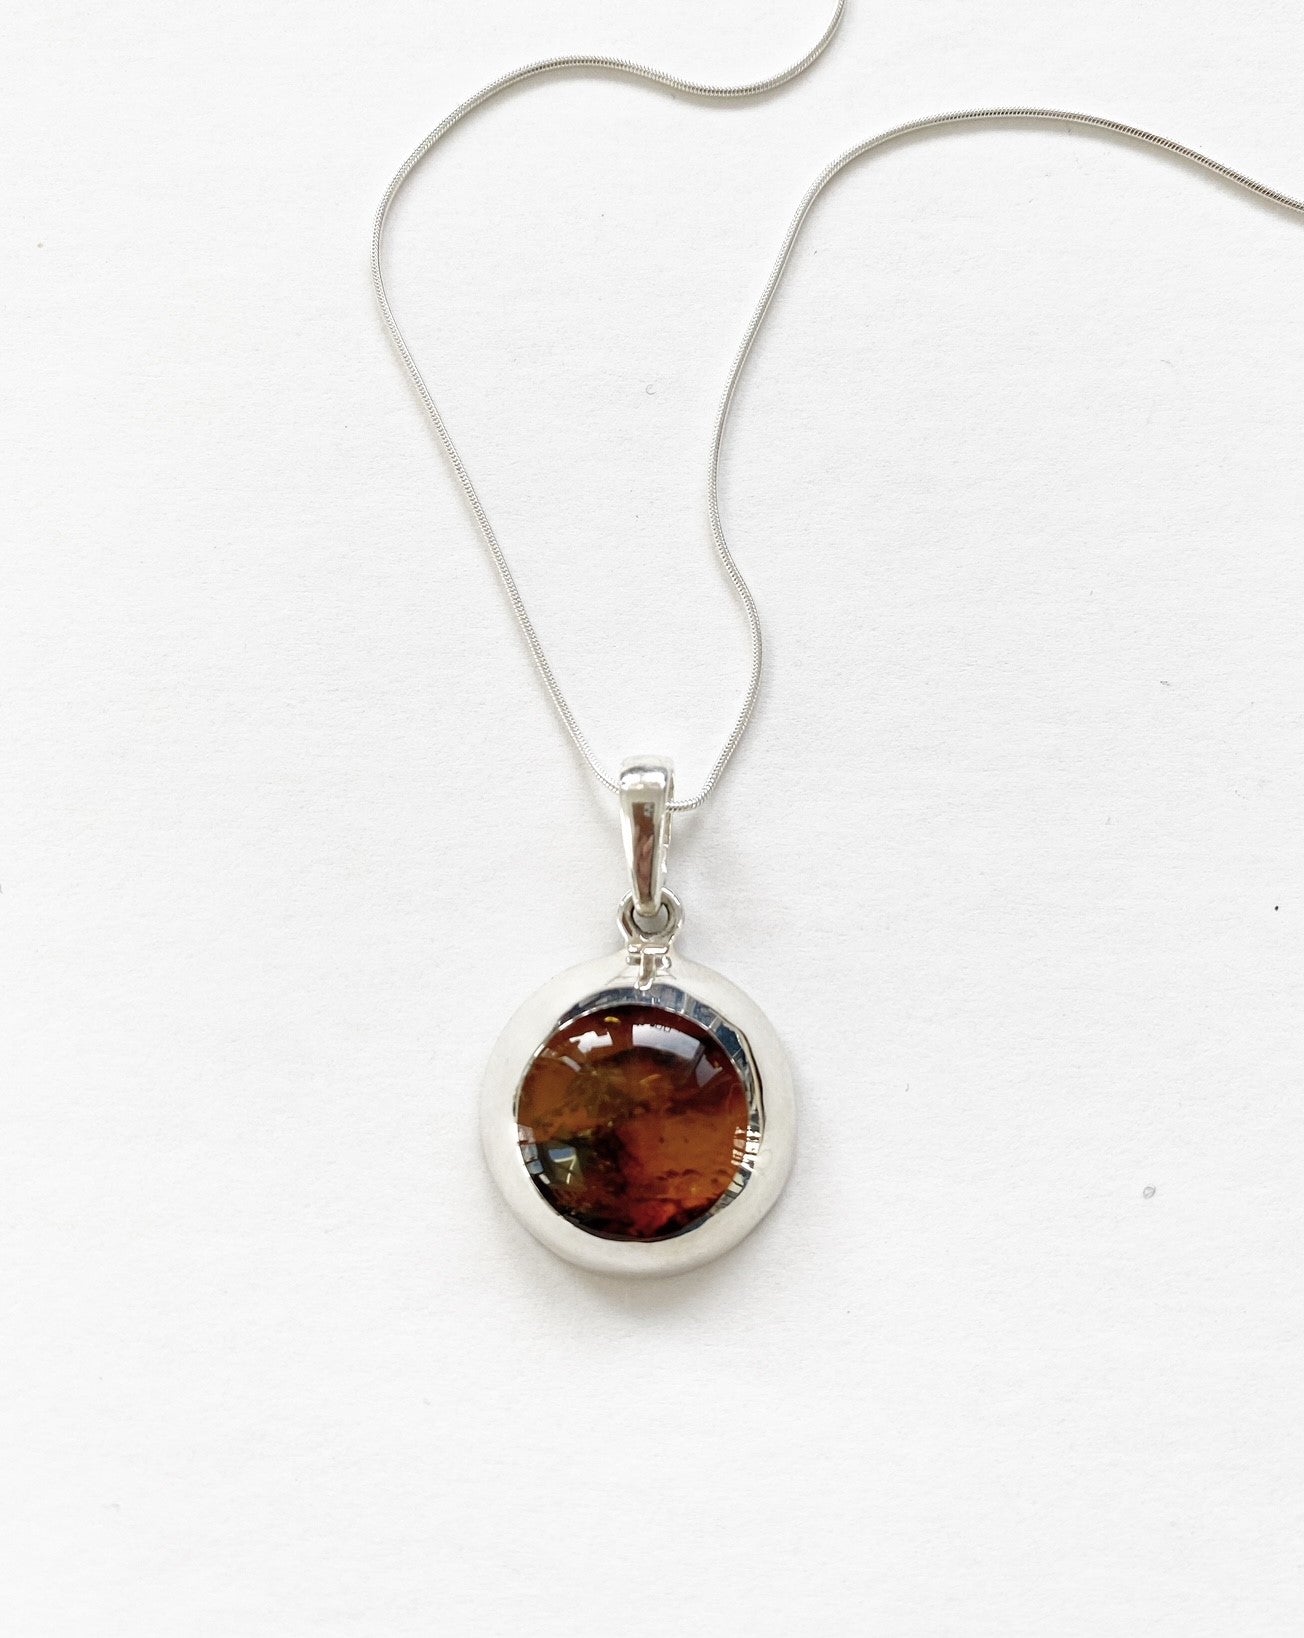 Amber Necklace Made of Cherry, Cognac, Honey and Golden Amber.